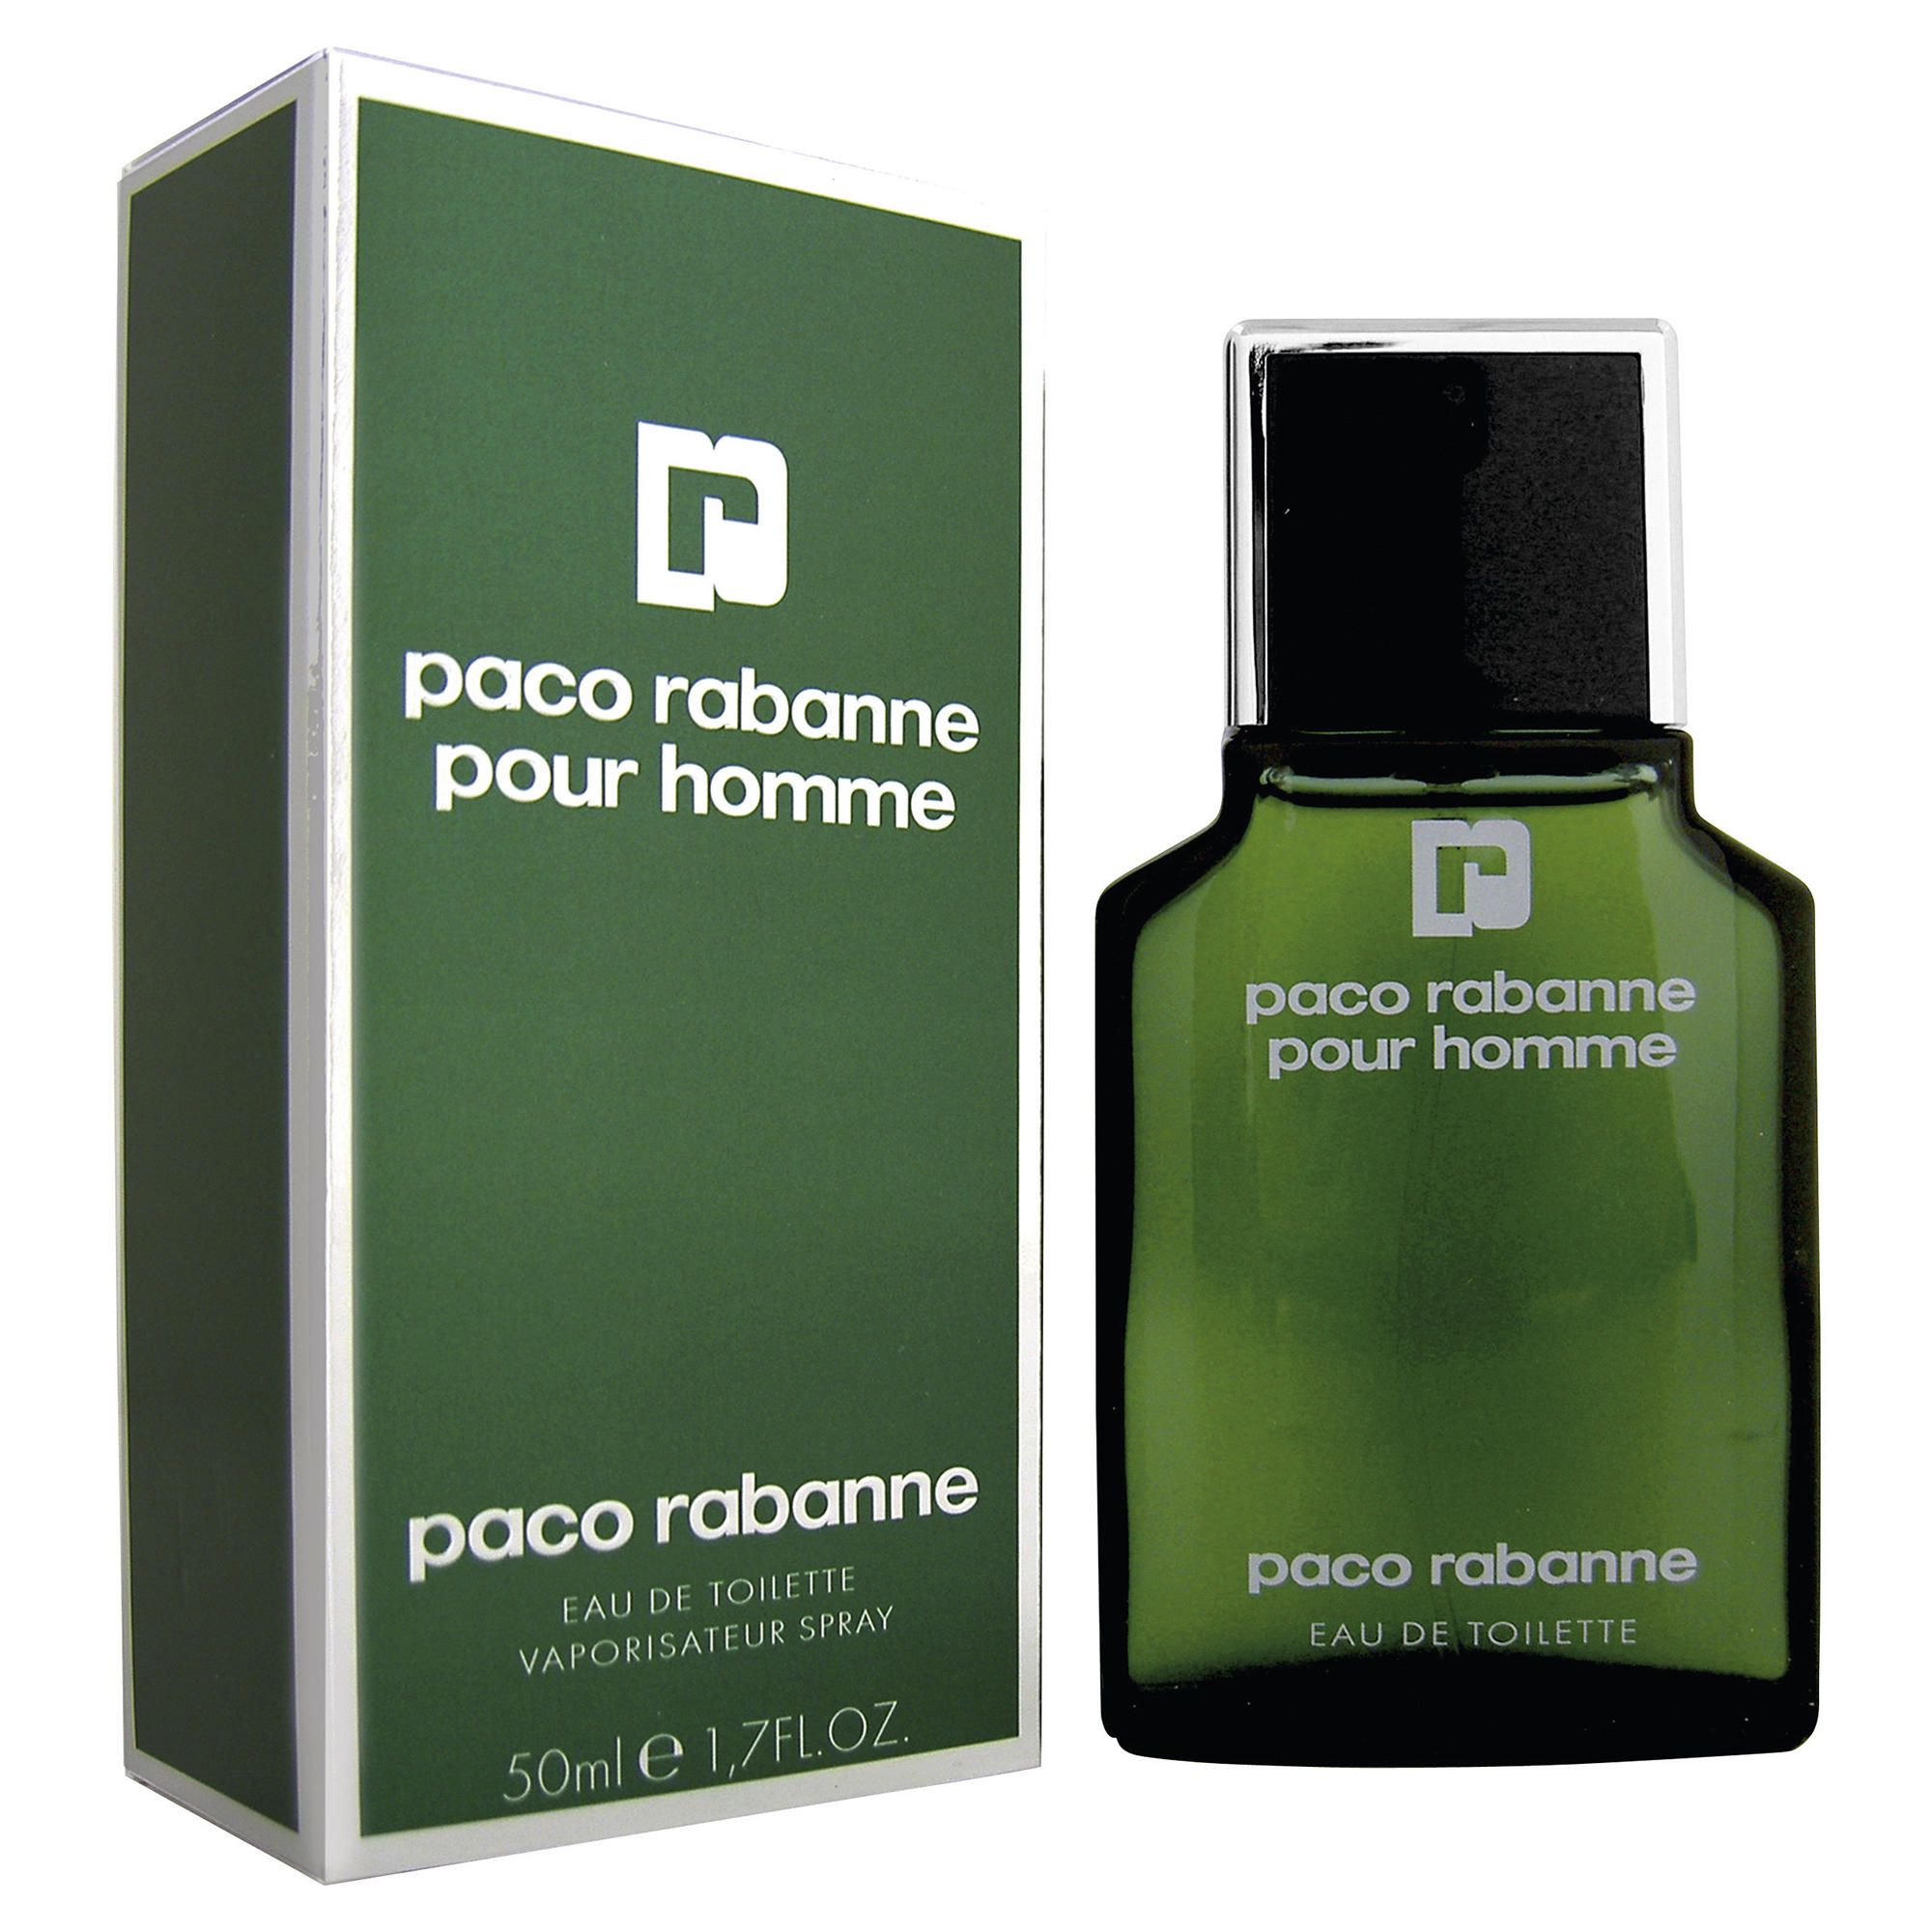 Paco Rabanne Pour Homme Mens Fragrance - Compare Prices at Foundem